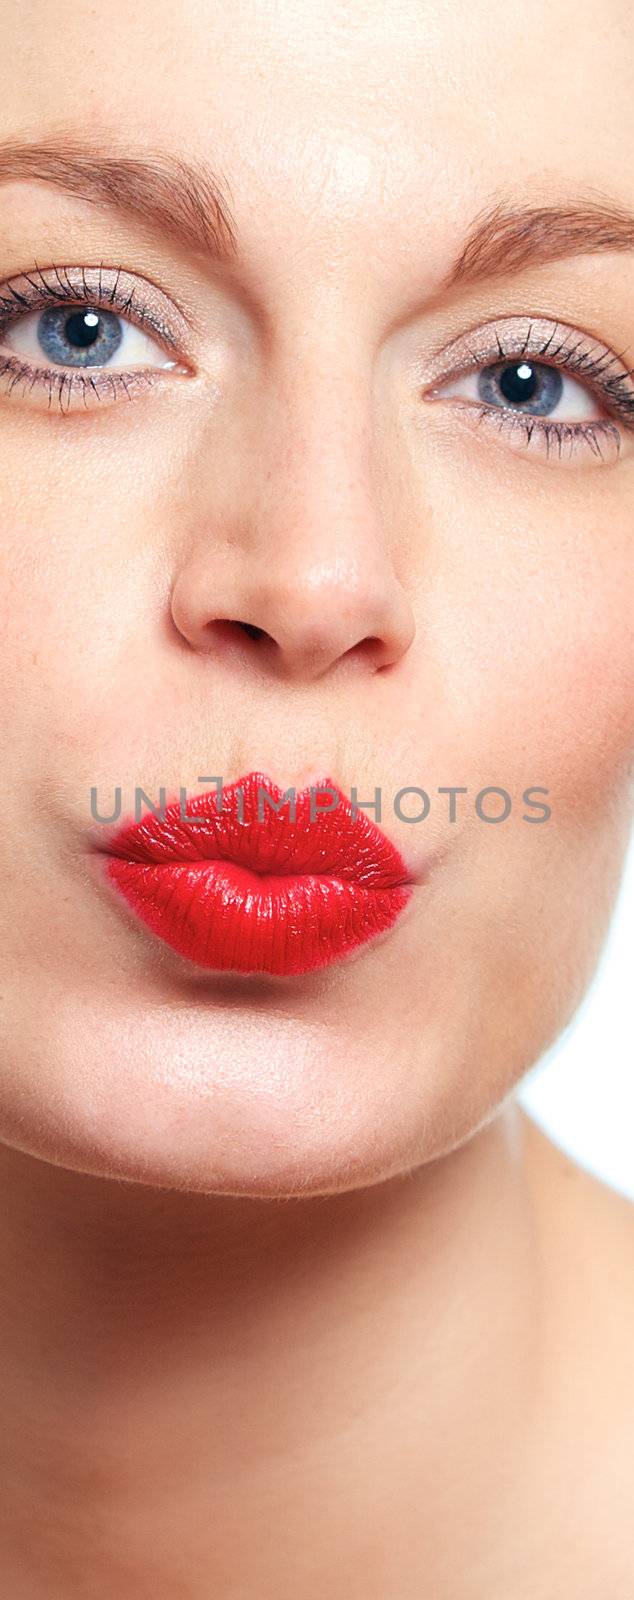 Crop of beautiful woman face with good skin